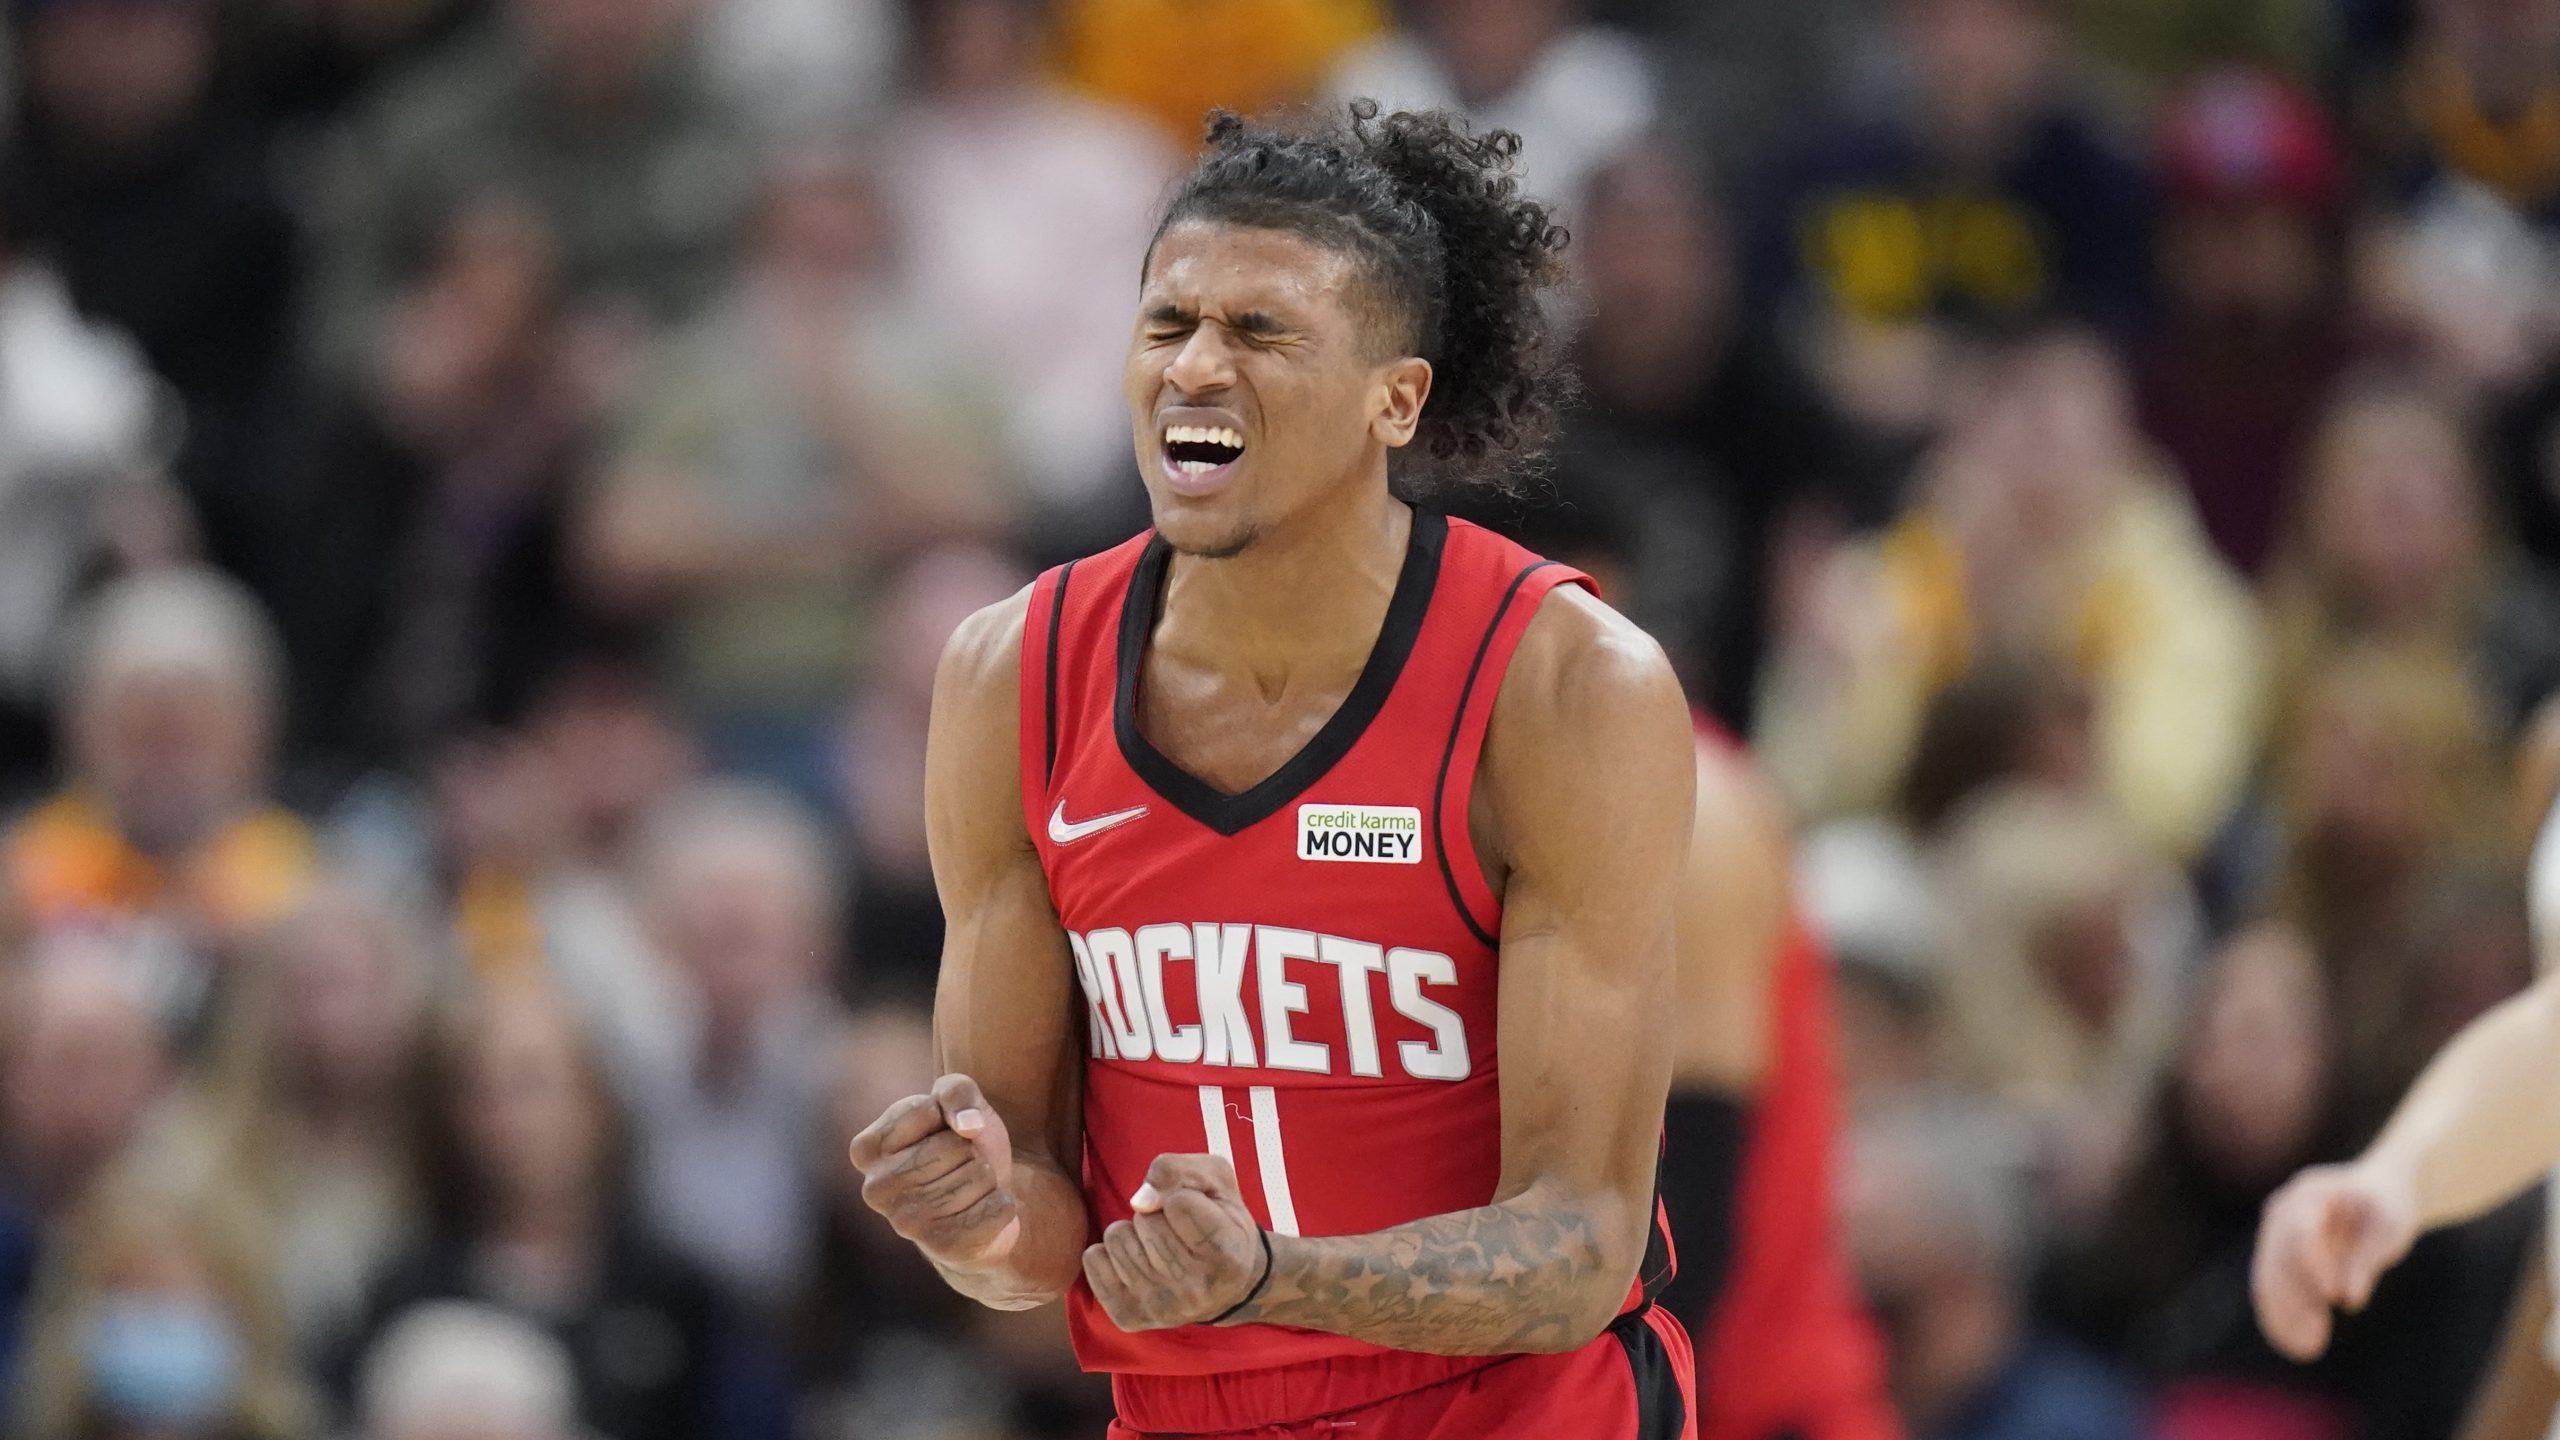 Houston Rockets guard Jalen Green (0) reacts after giving the ball away in the second half during an NBA basketball game against the Utah Jazz Monday, Feb. 14, 2022, in Salt Lake City